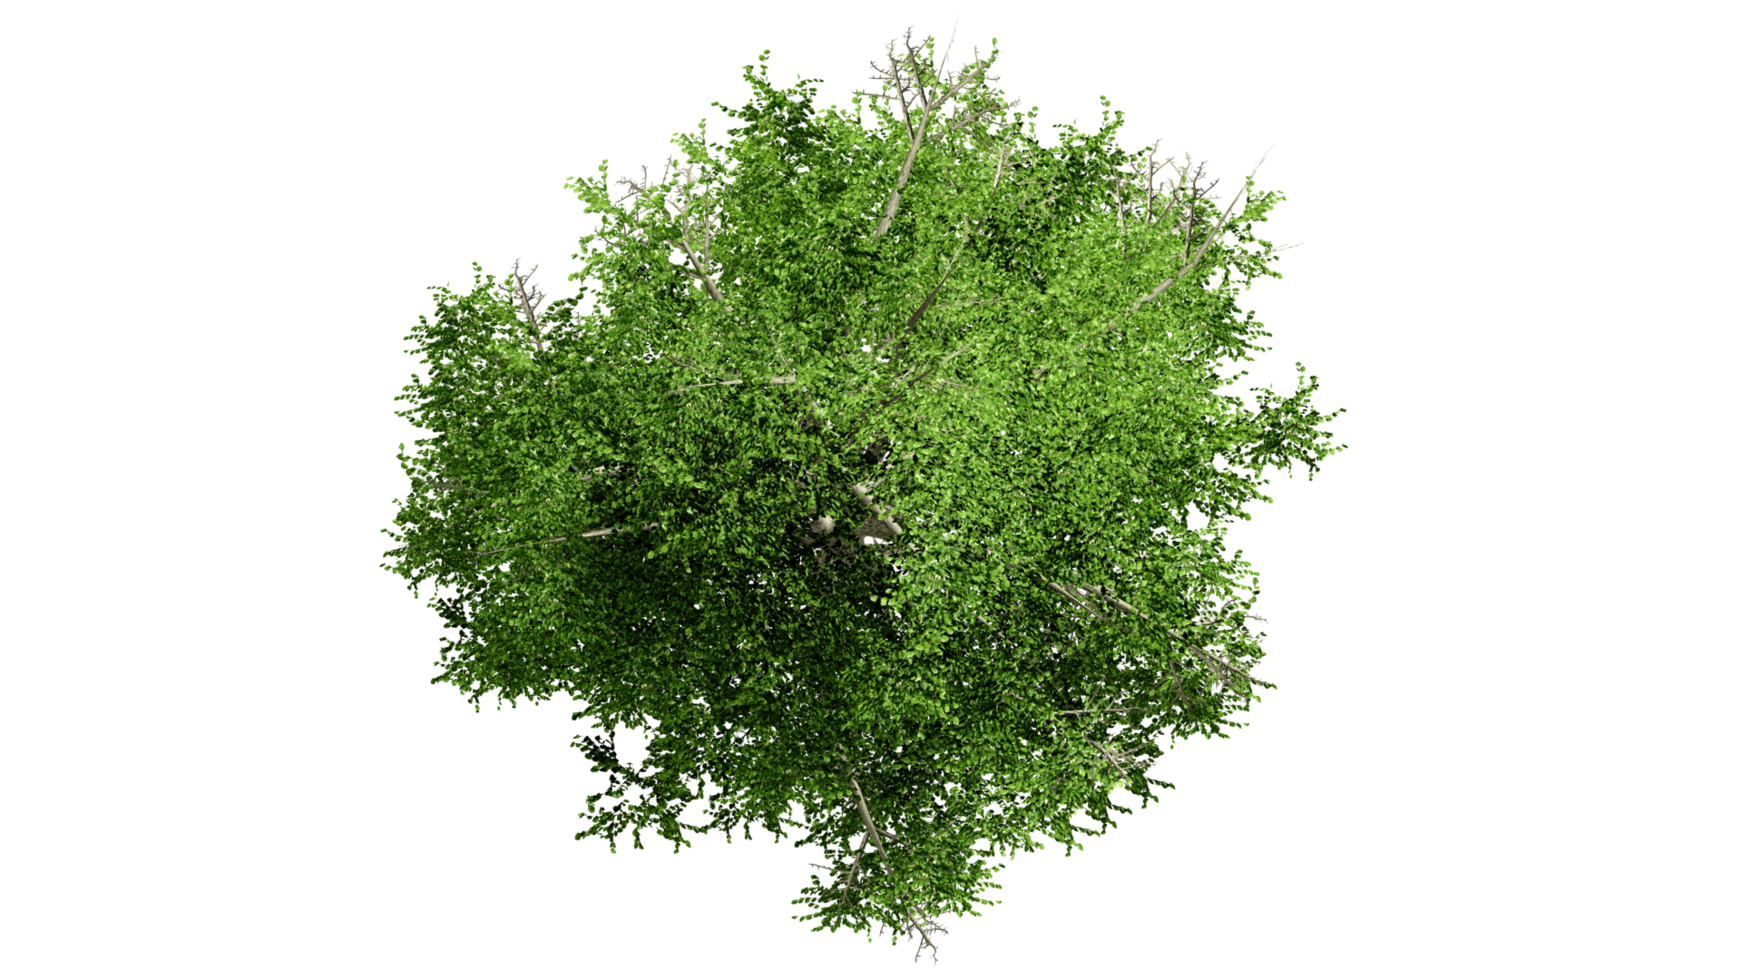 3D Top view Green Trees Isolated on PNGs transparent background , Use for visualization in architectural design or garden decorate